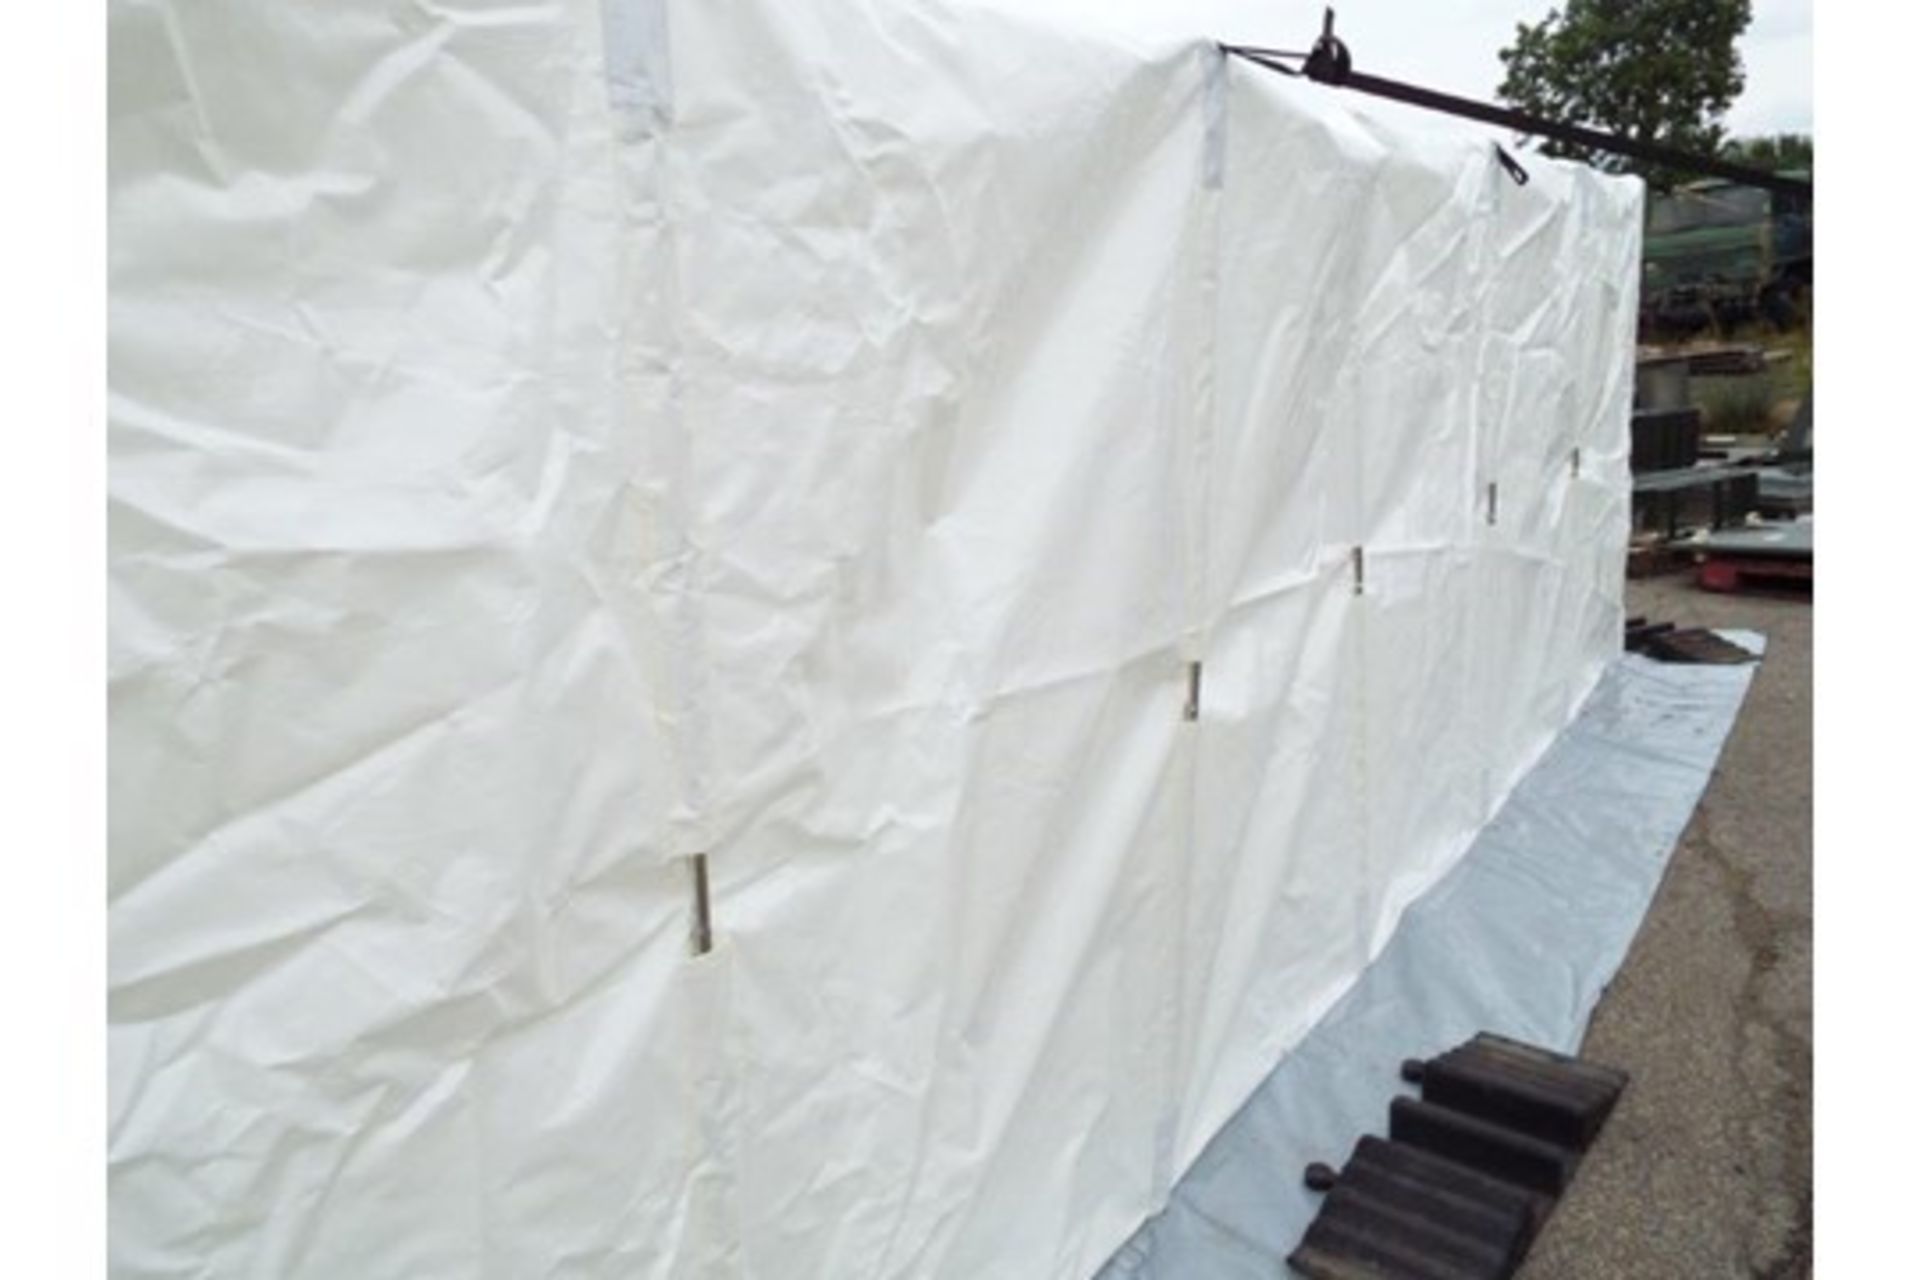 Unissued 8mx4m Inflatable Decontamination/Party Tent - Image 5 of 14